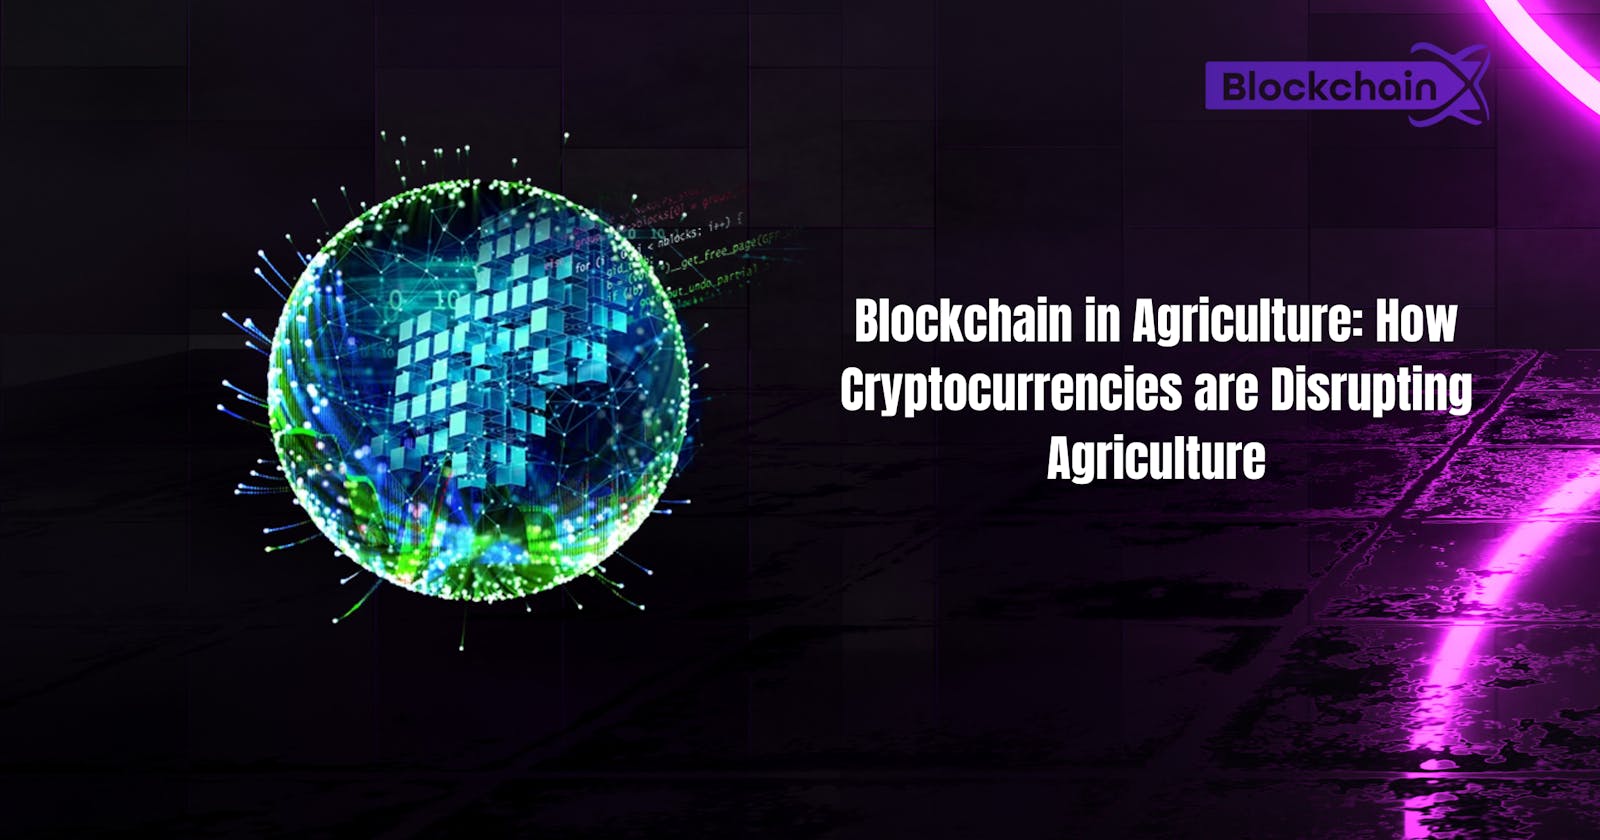 Blockchain in Agriculture: How Cryptocurrencies are Disrupting Agriculture